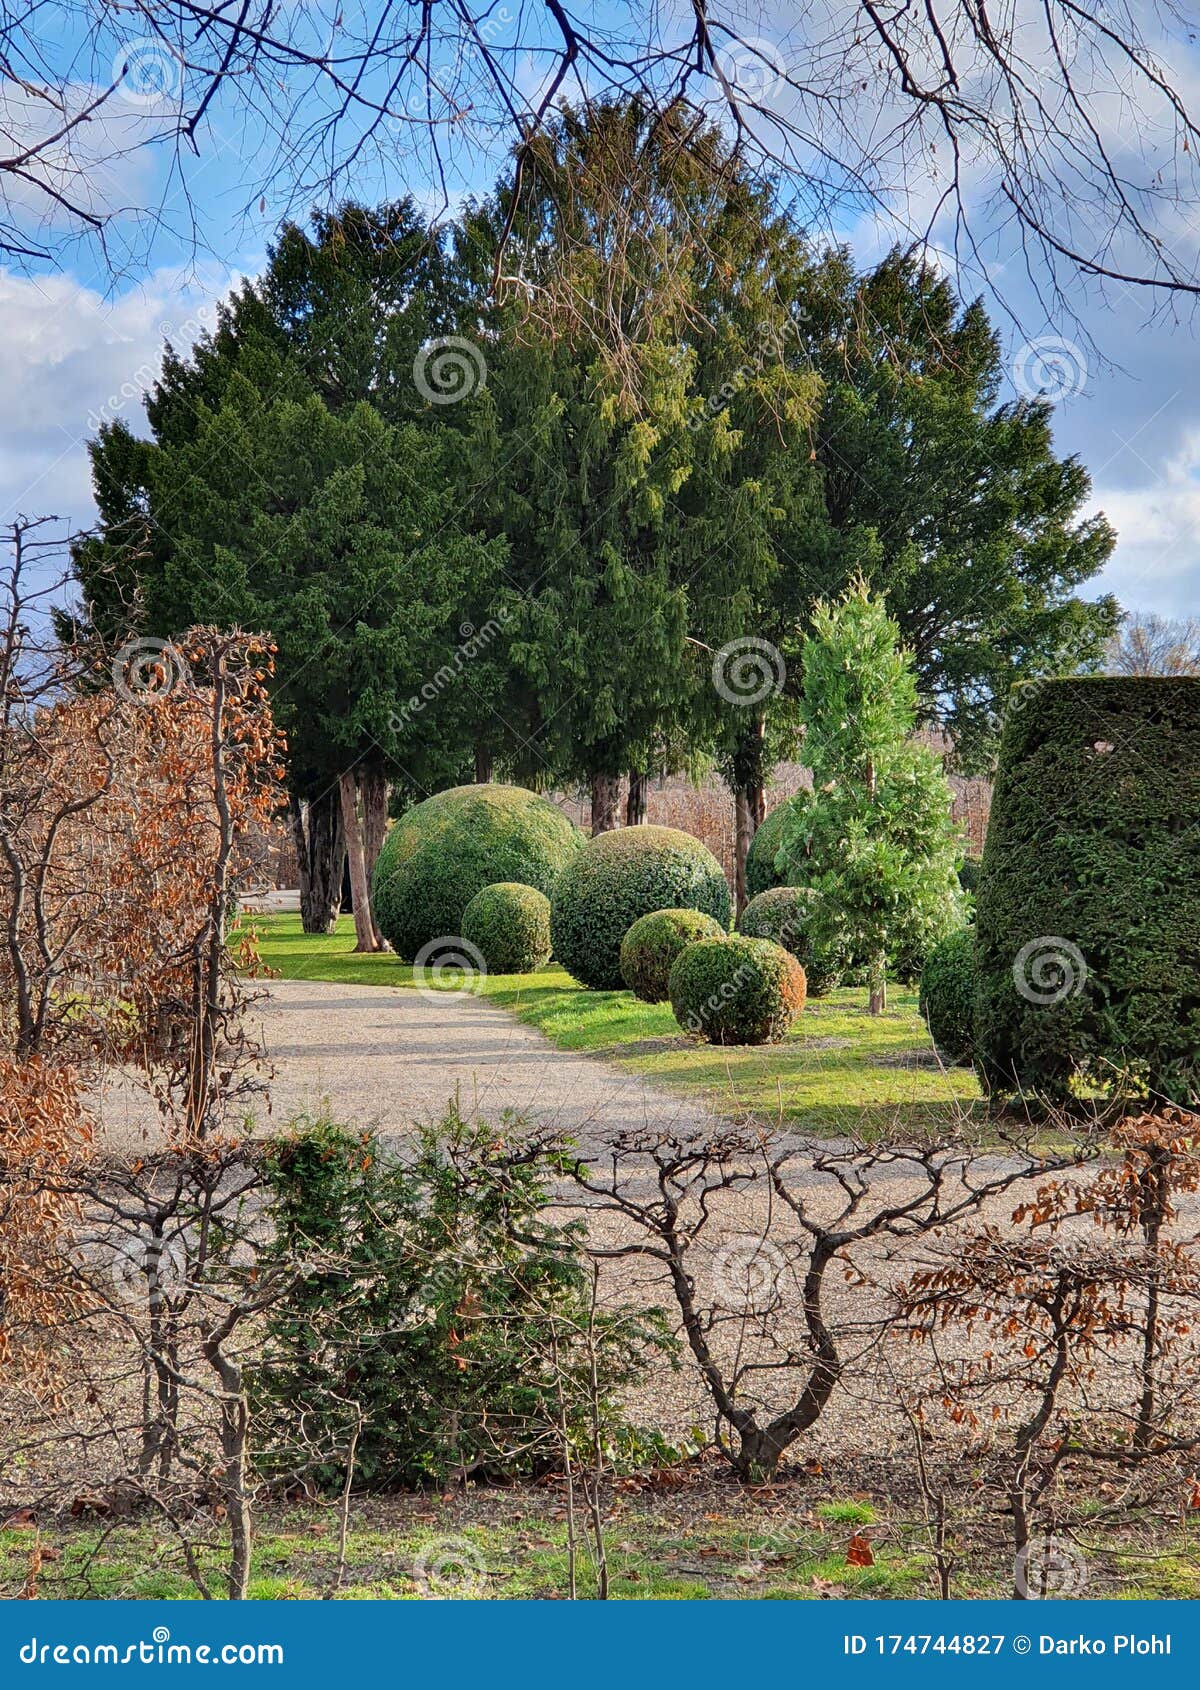 evergreen conifers and ornamental shrubs in the park